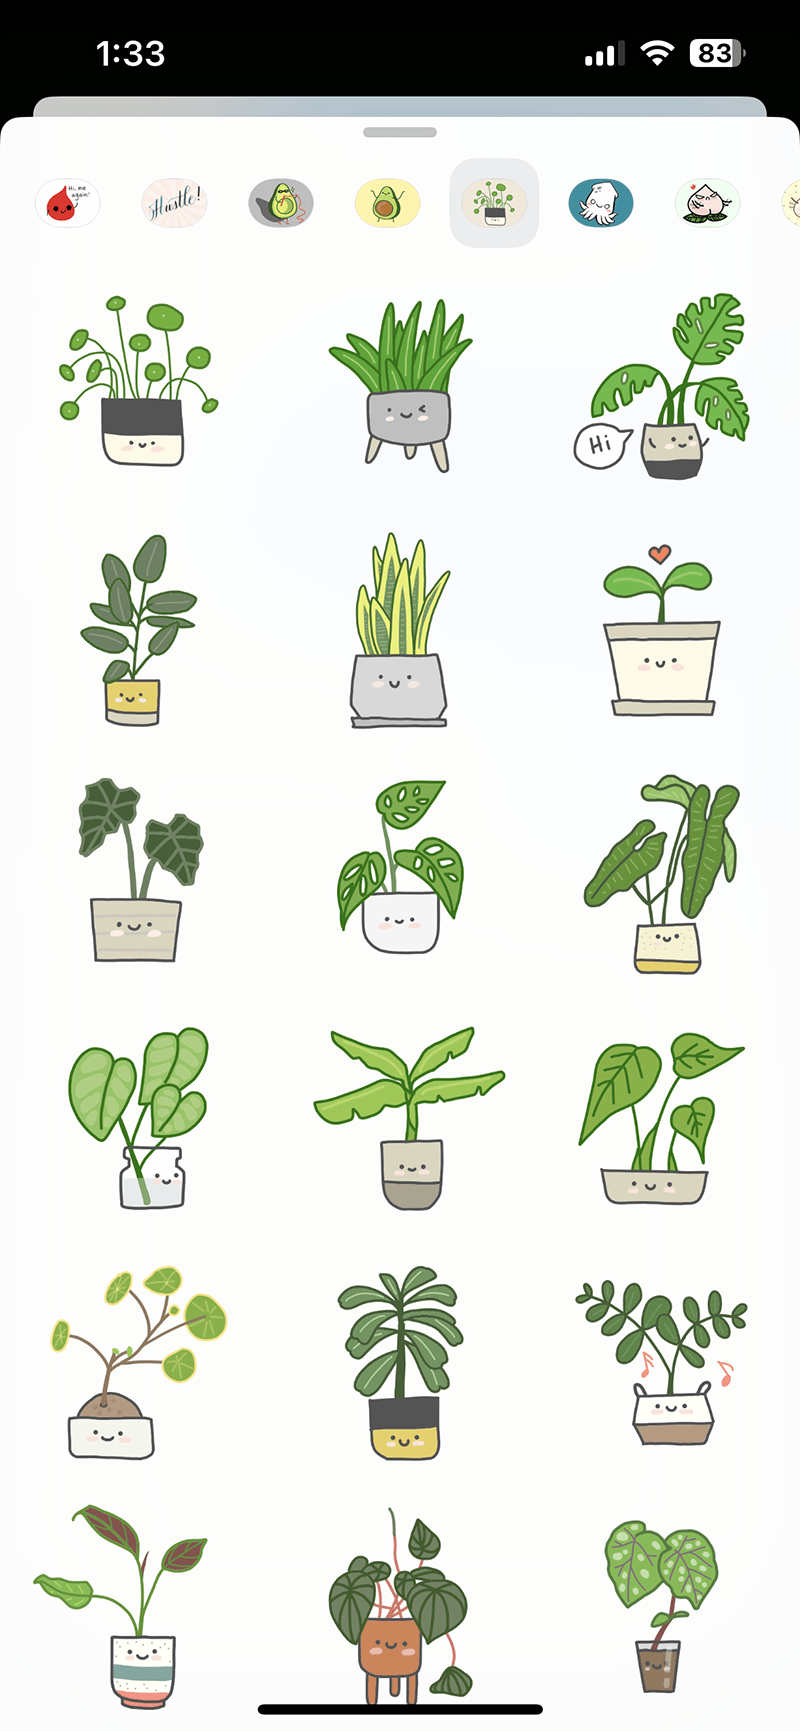 A sticker pack featuring happy plants